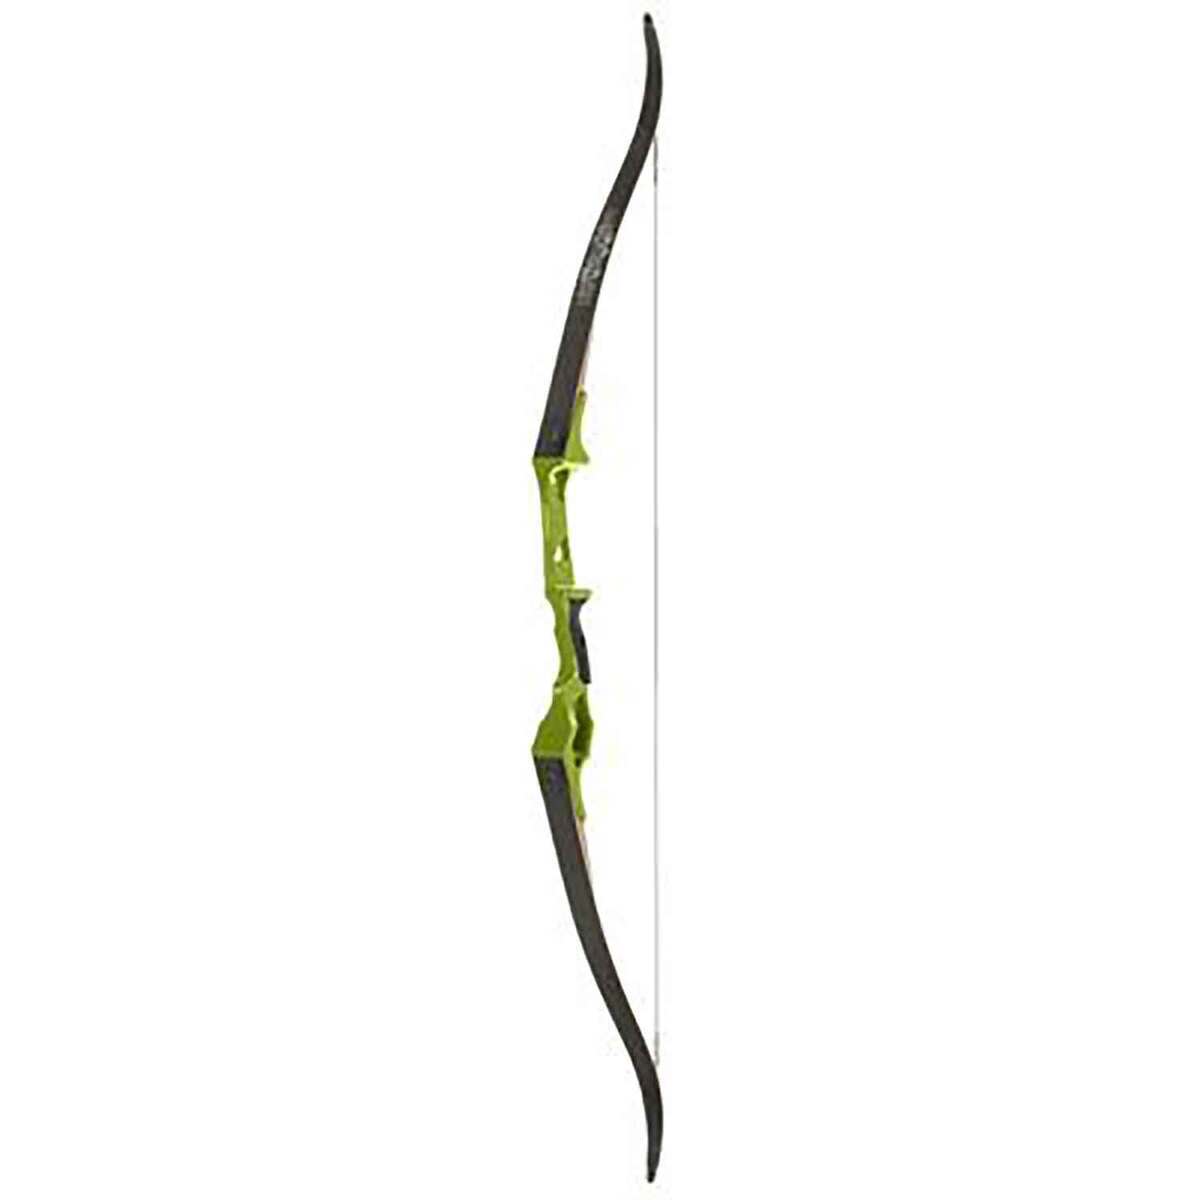 Fin-Finder Bank Runner 35lbs Right Hand Green Traditional Recurve  Bowfishing Bow